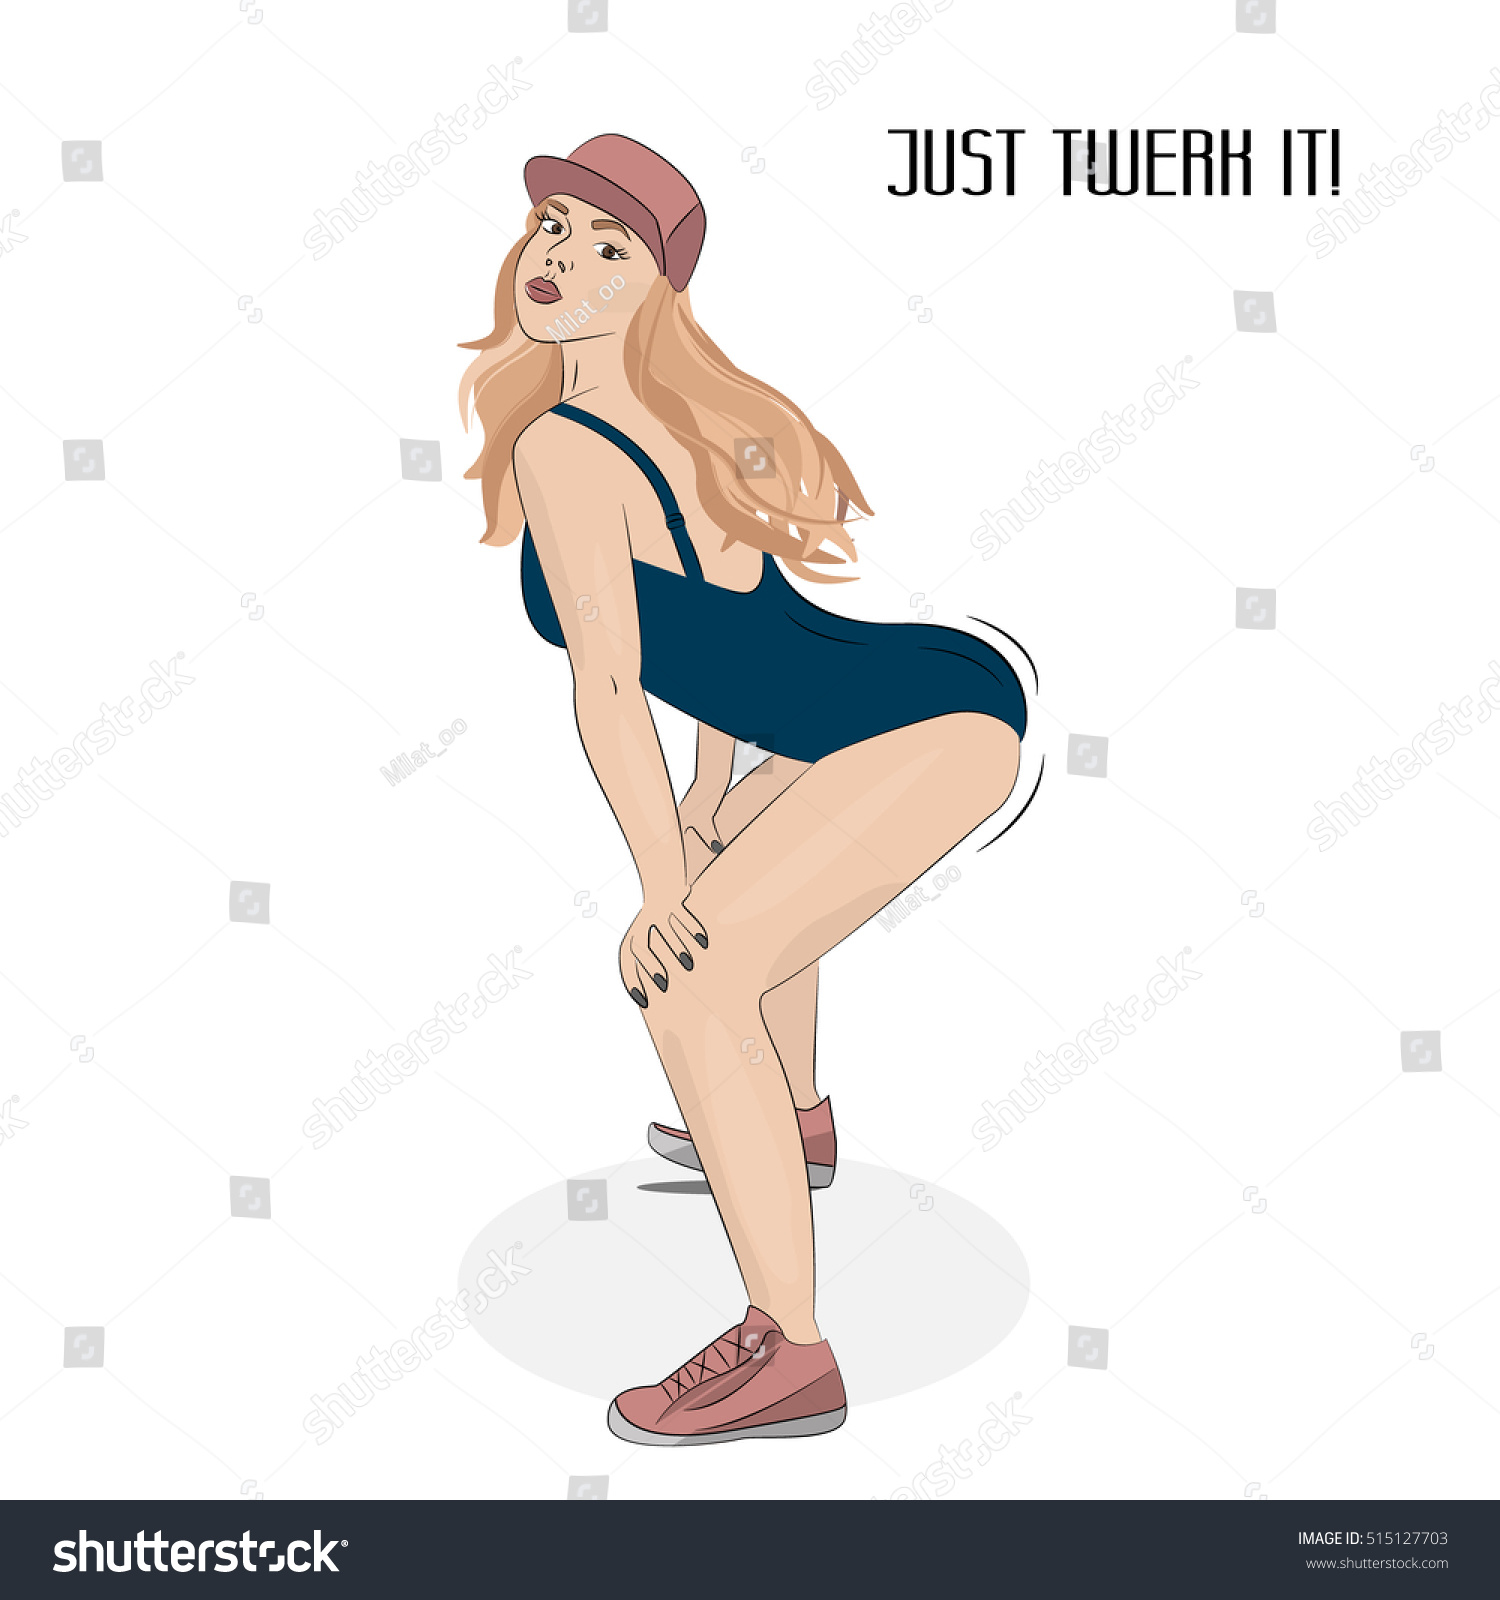 How to twerk with small butt